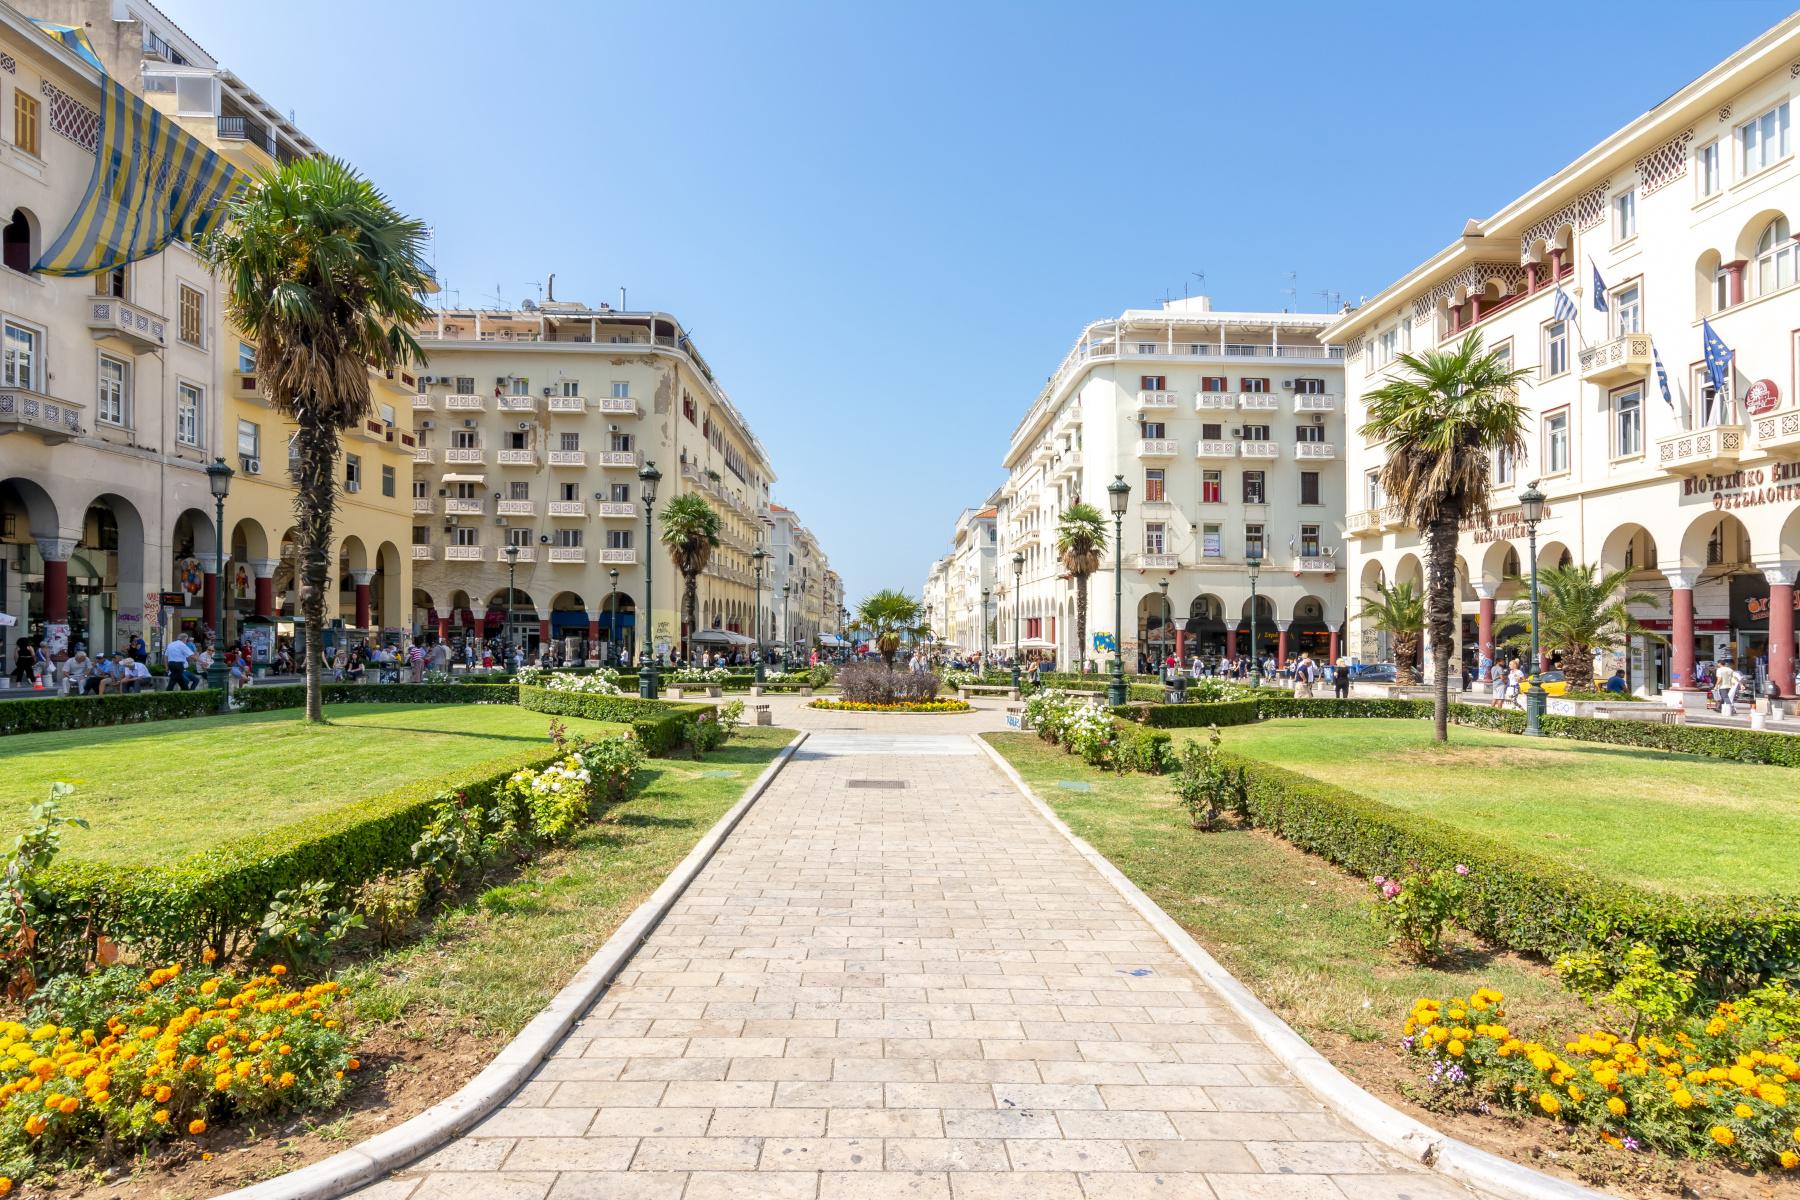 The Aristotle square in the center of Thessaloniki Greece